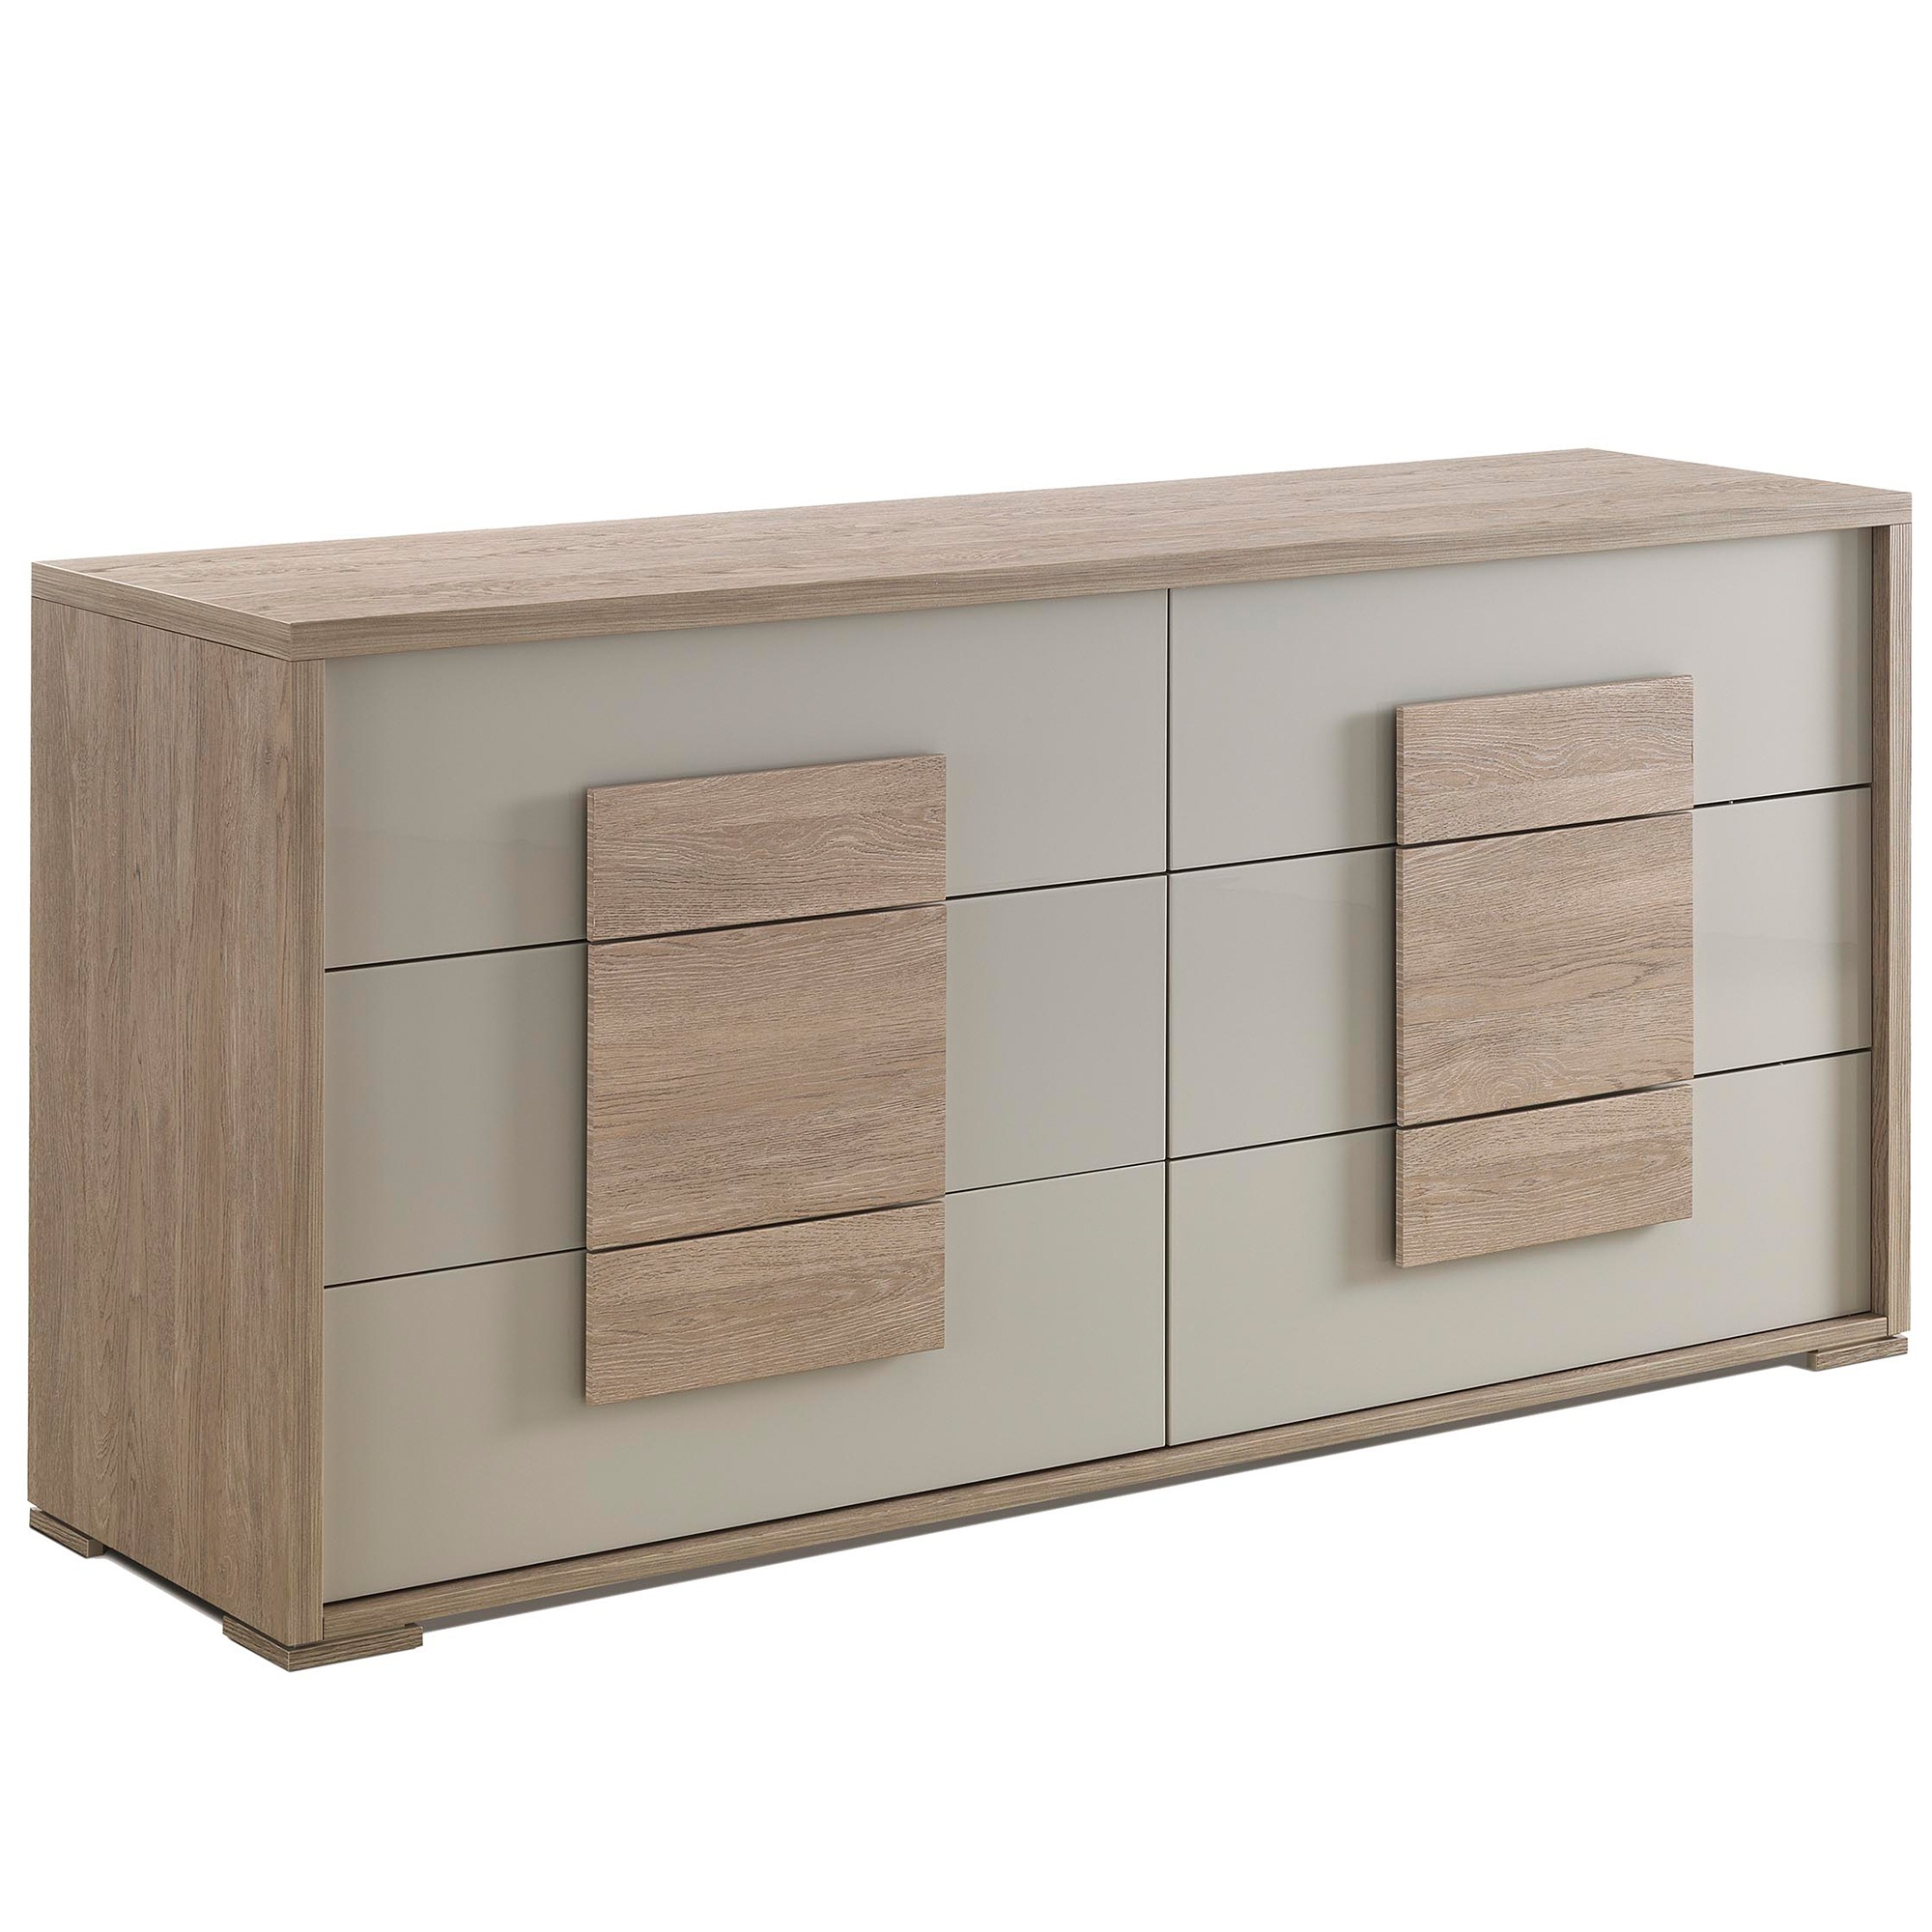 Lia Large Chest Of Drawers Bedroom, Large Chest Of Drawers Dresser